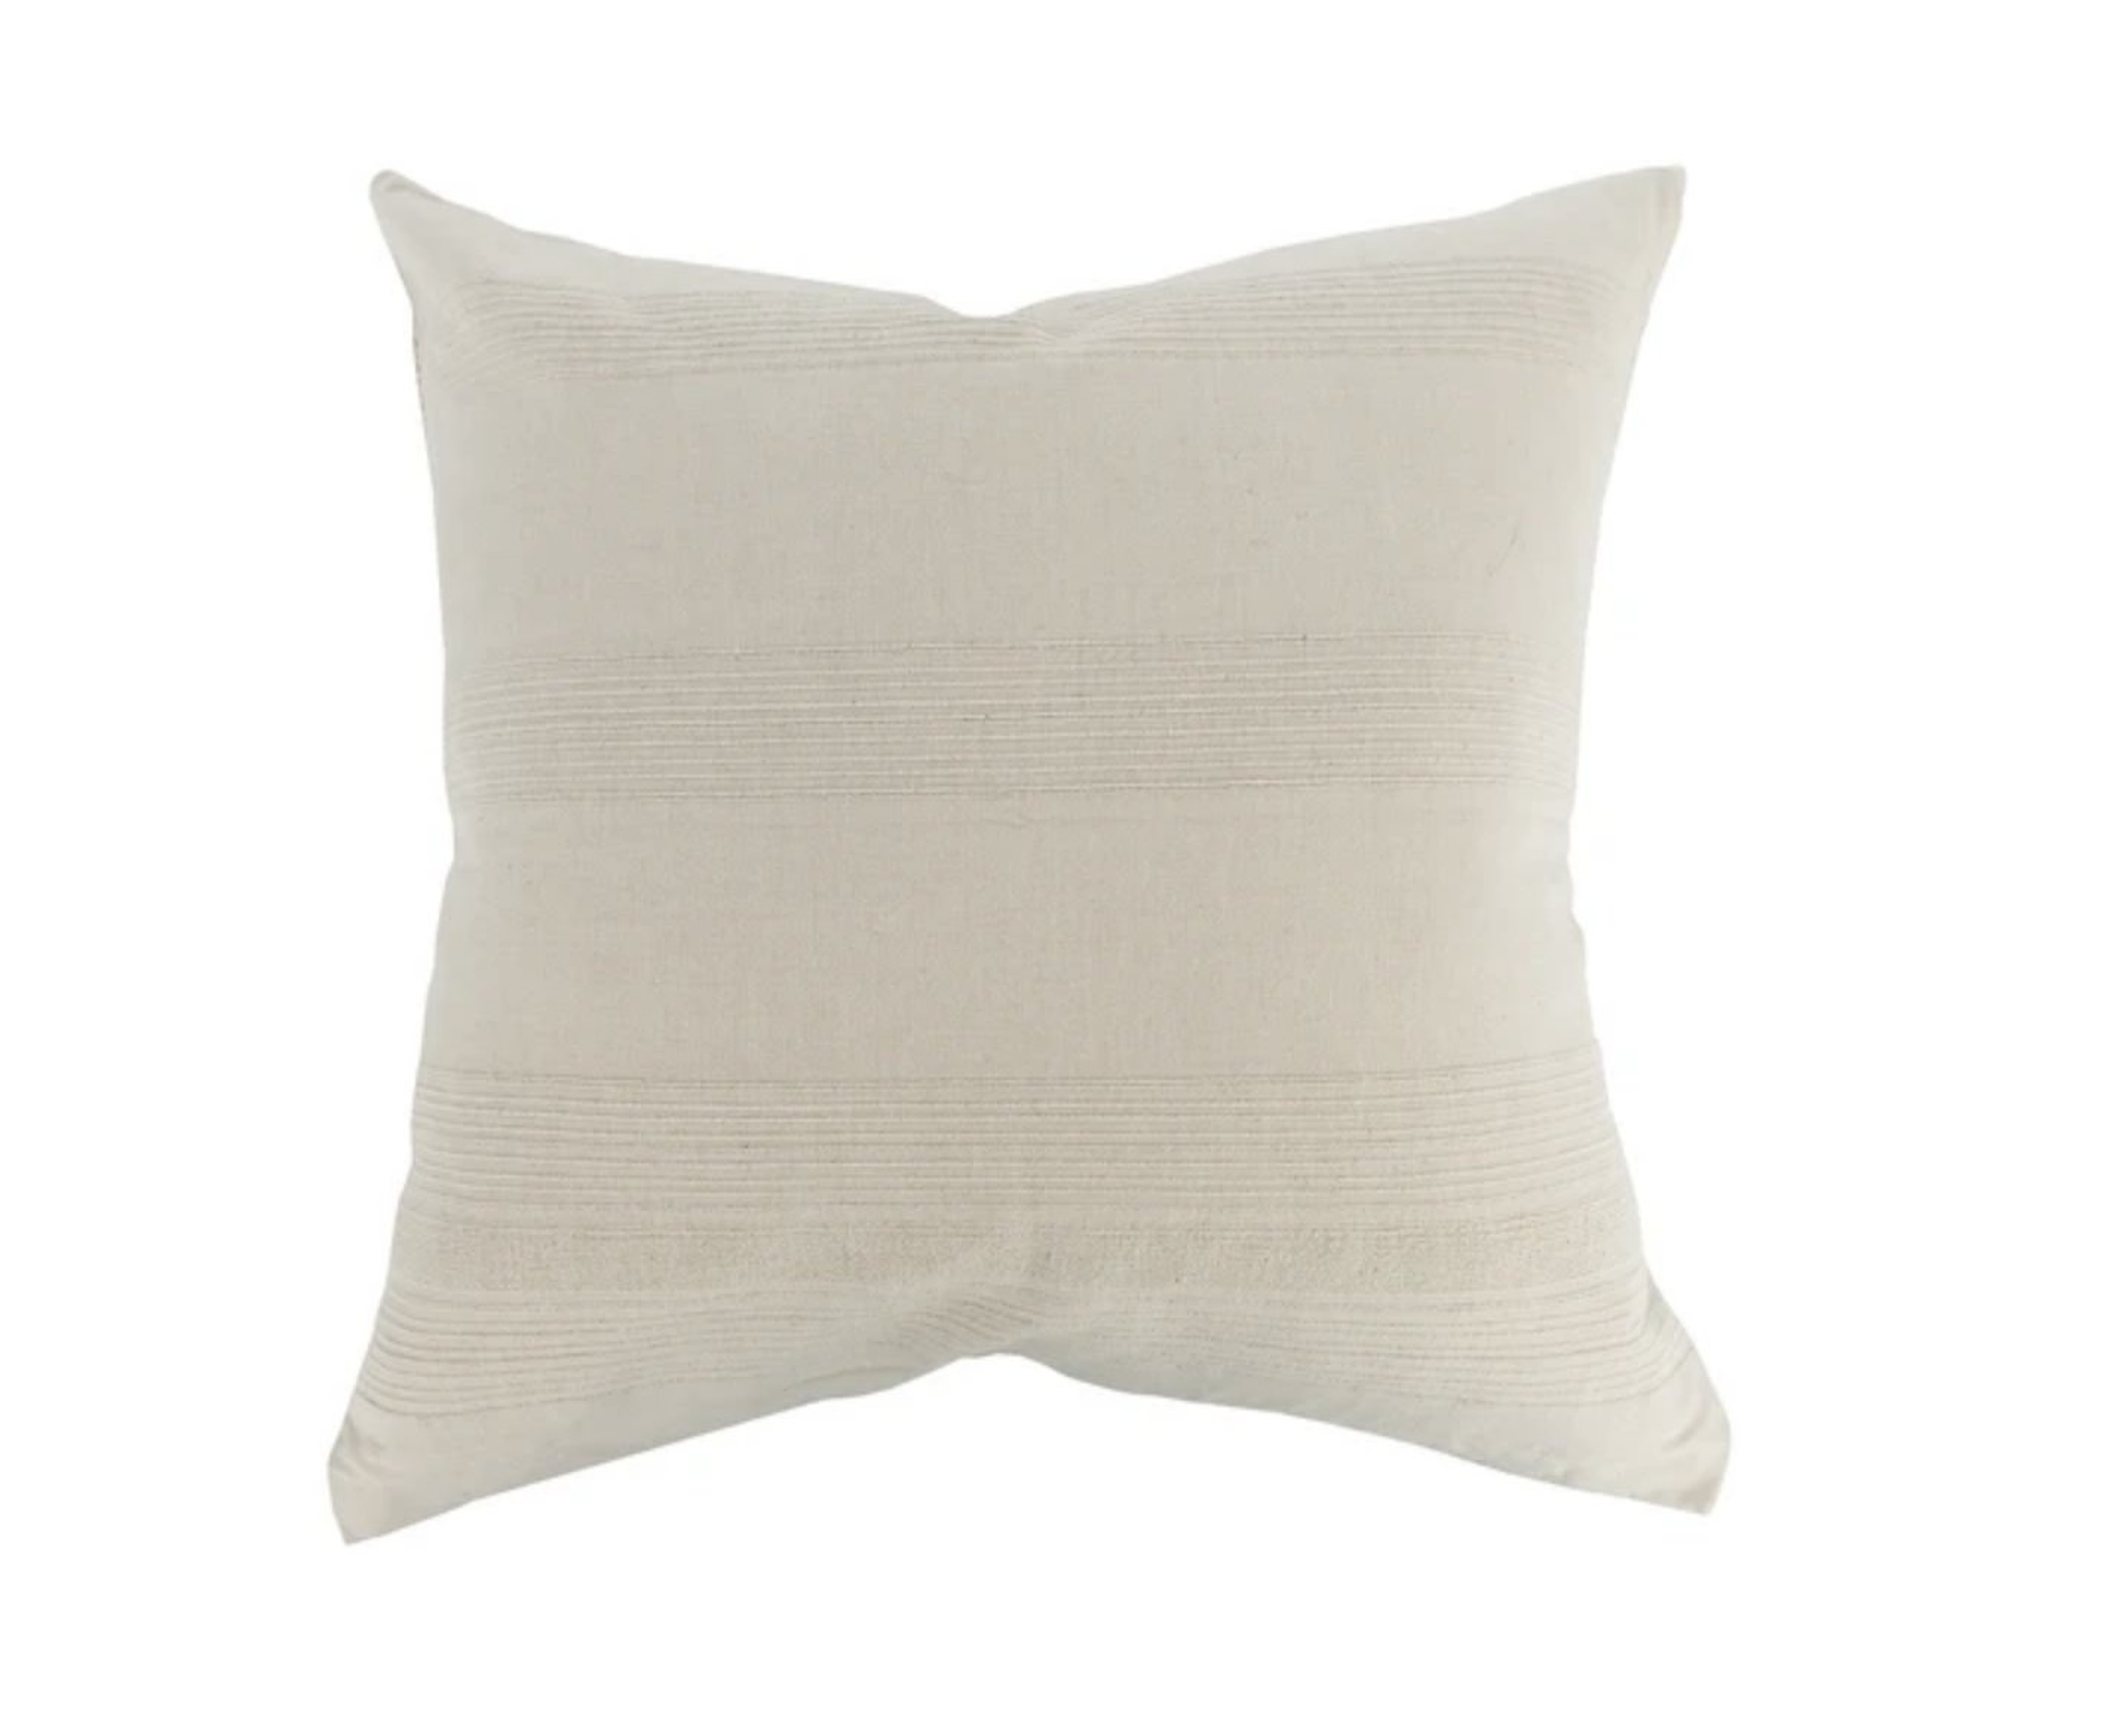 Ellery Cream Striped Pillow Cover - McGee & Co.